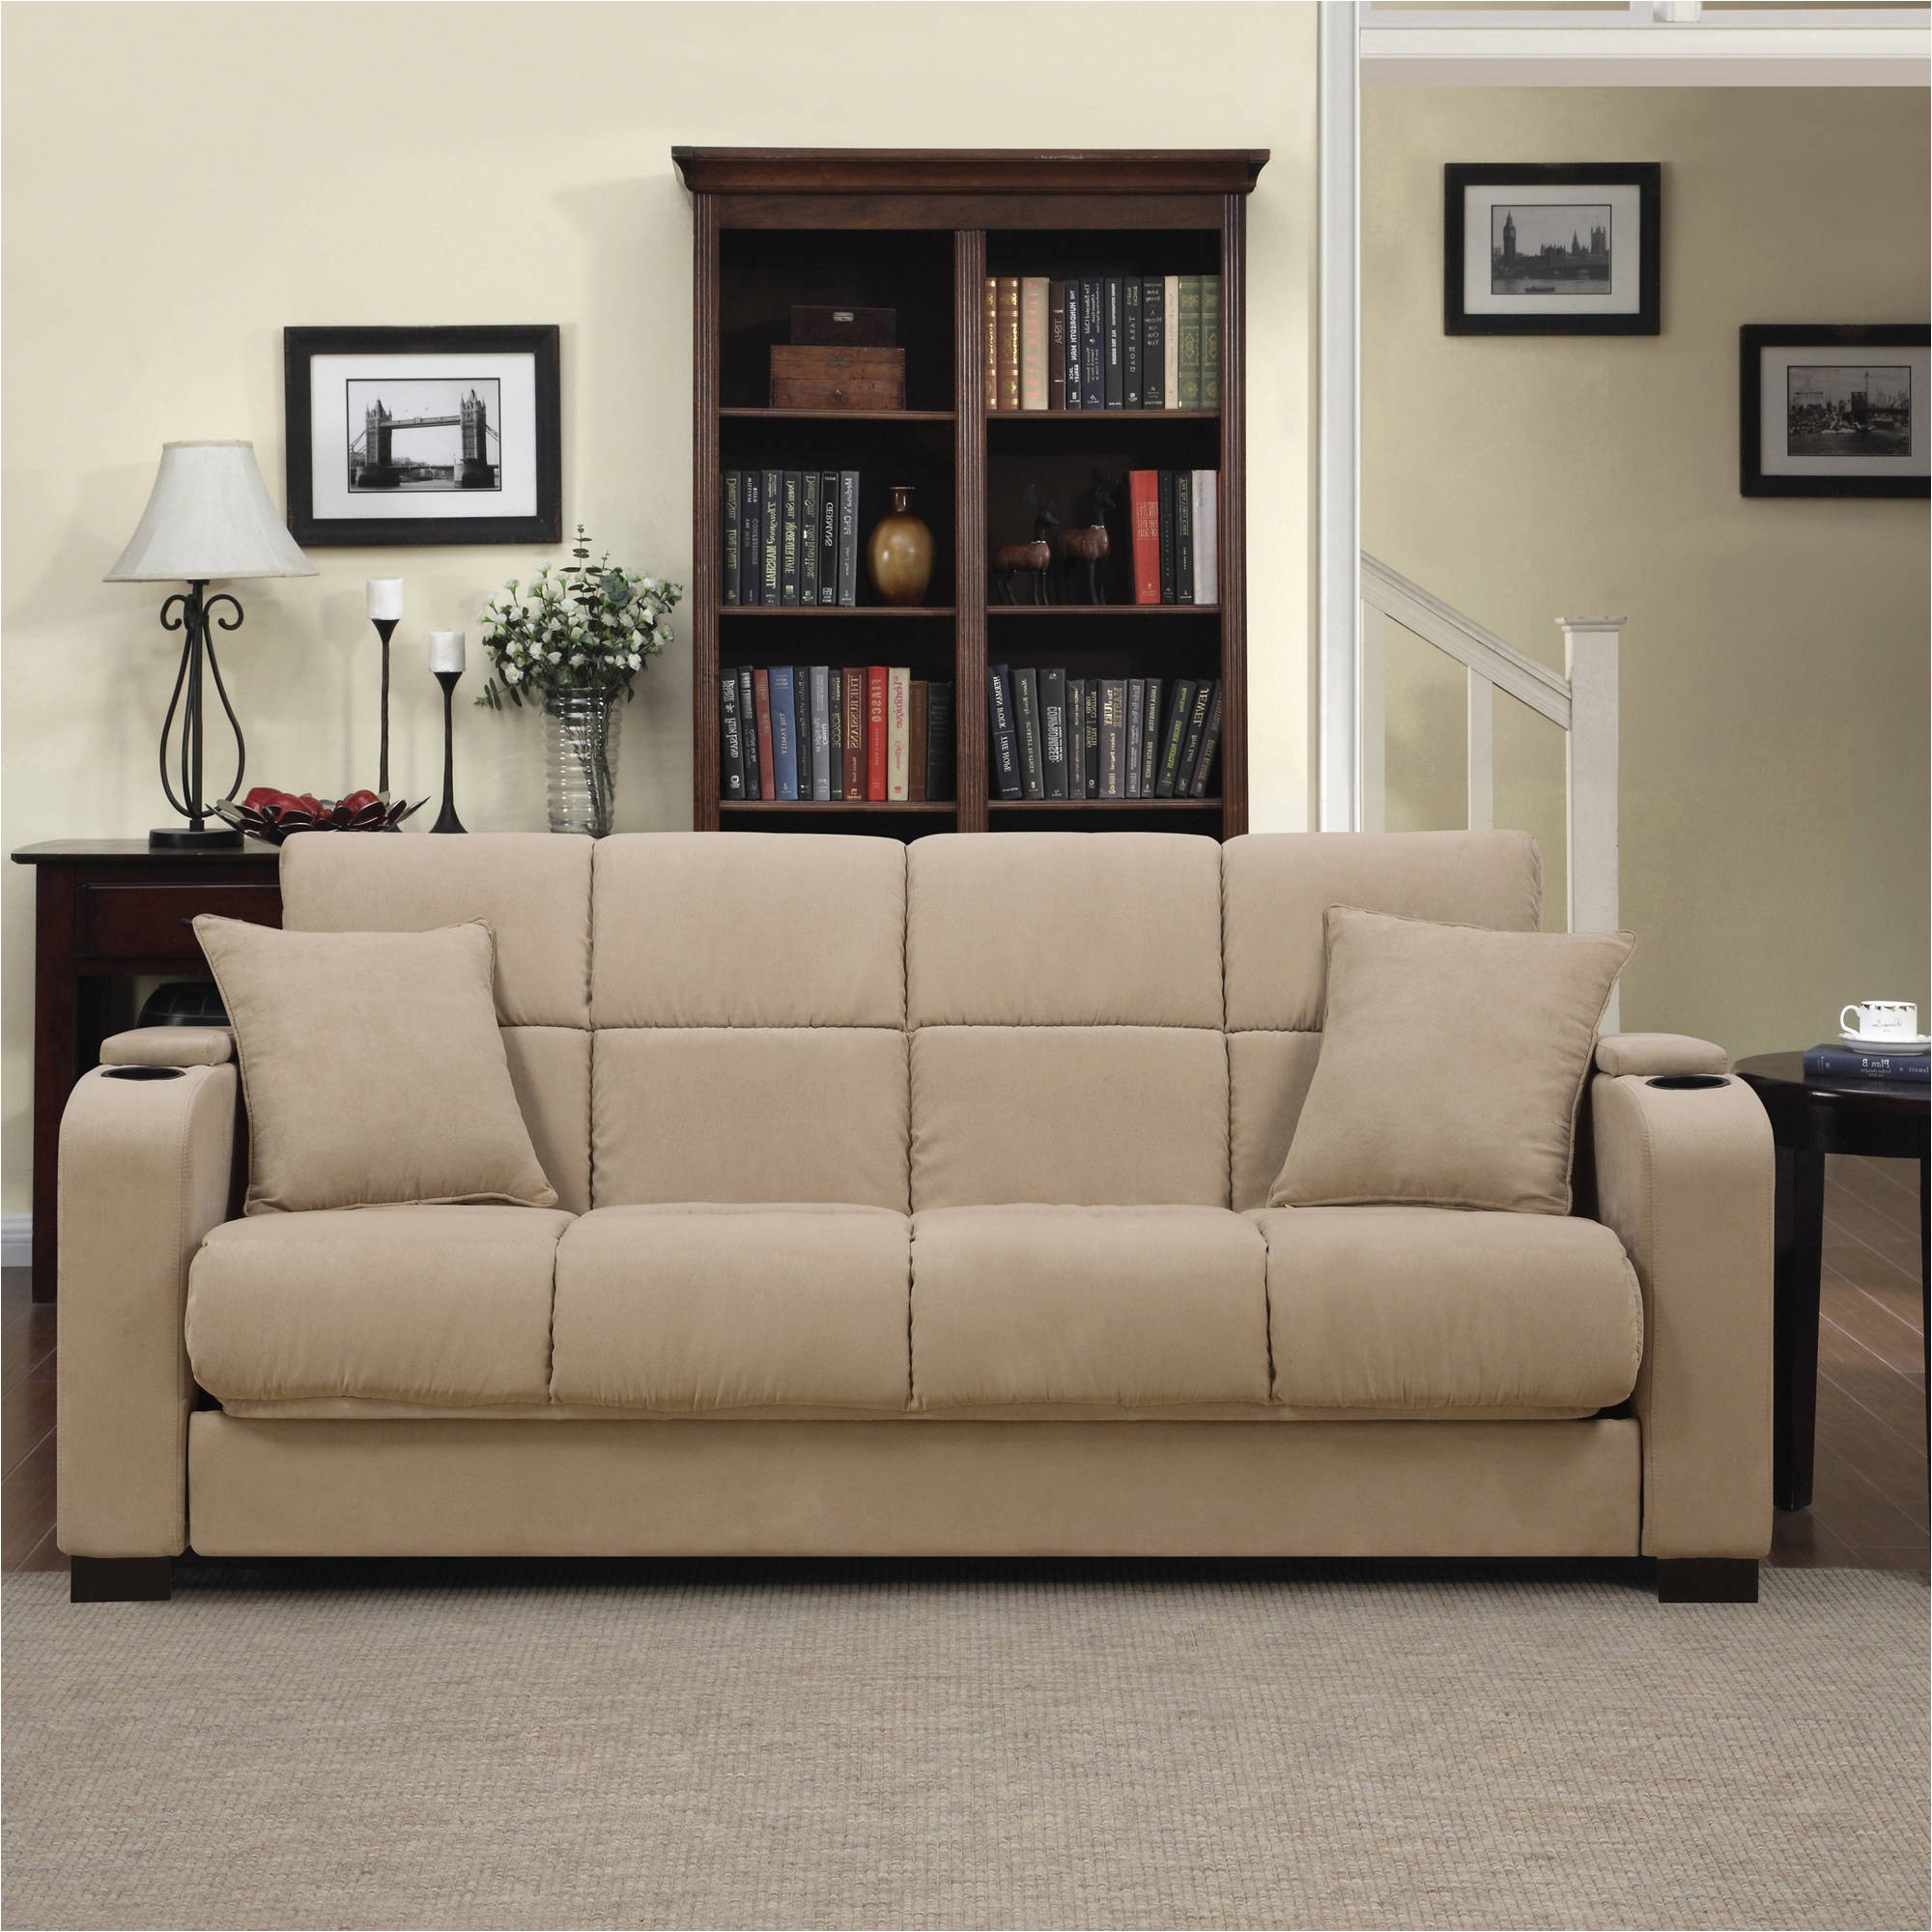 sofas sectionals multiple colors buchannan microfiber sofa corner sectional taupe incredible picturesesign